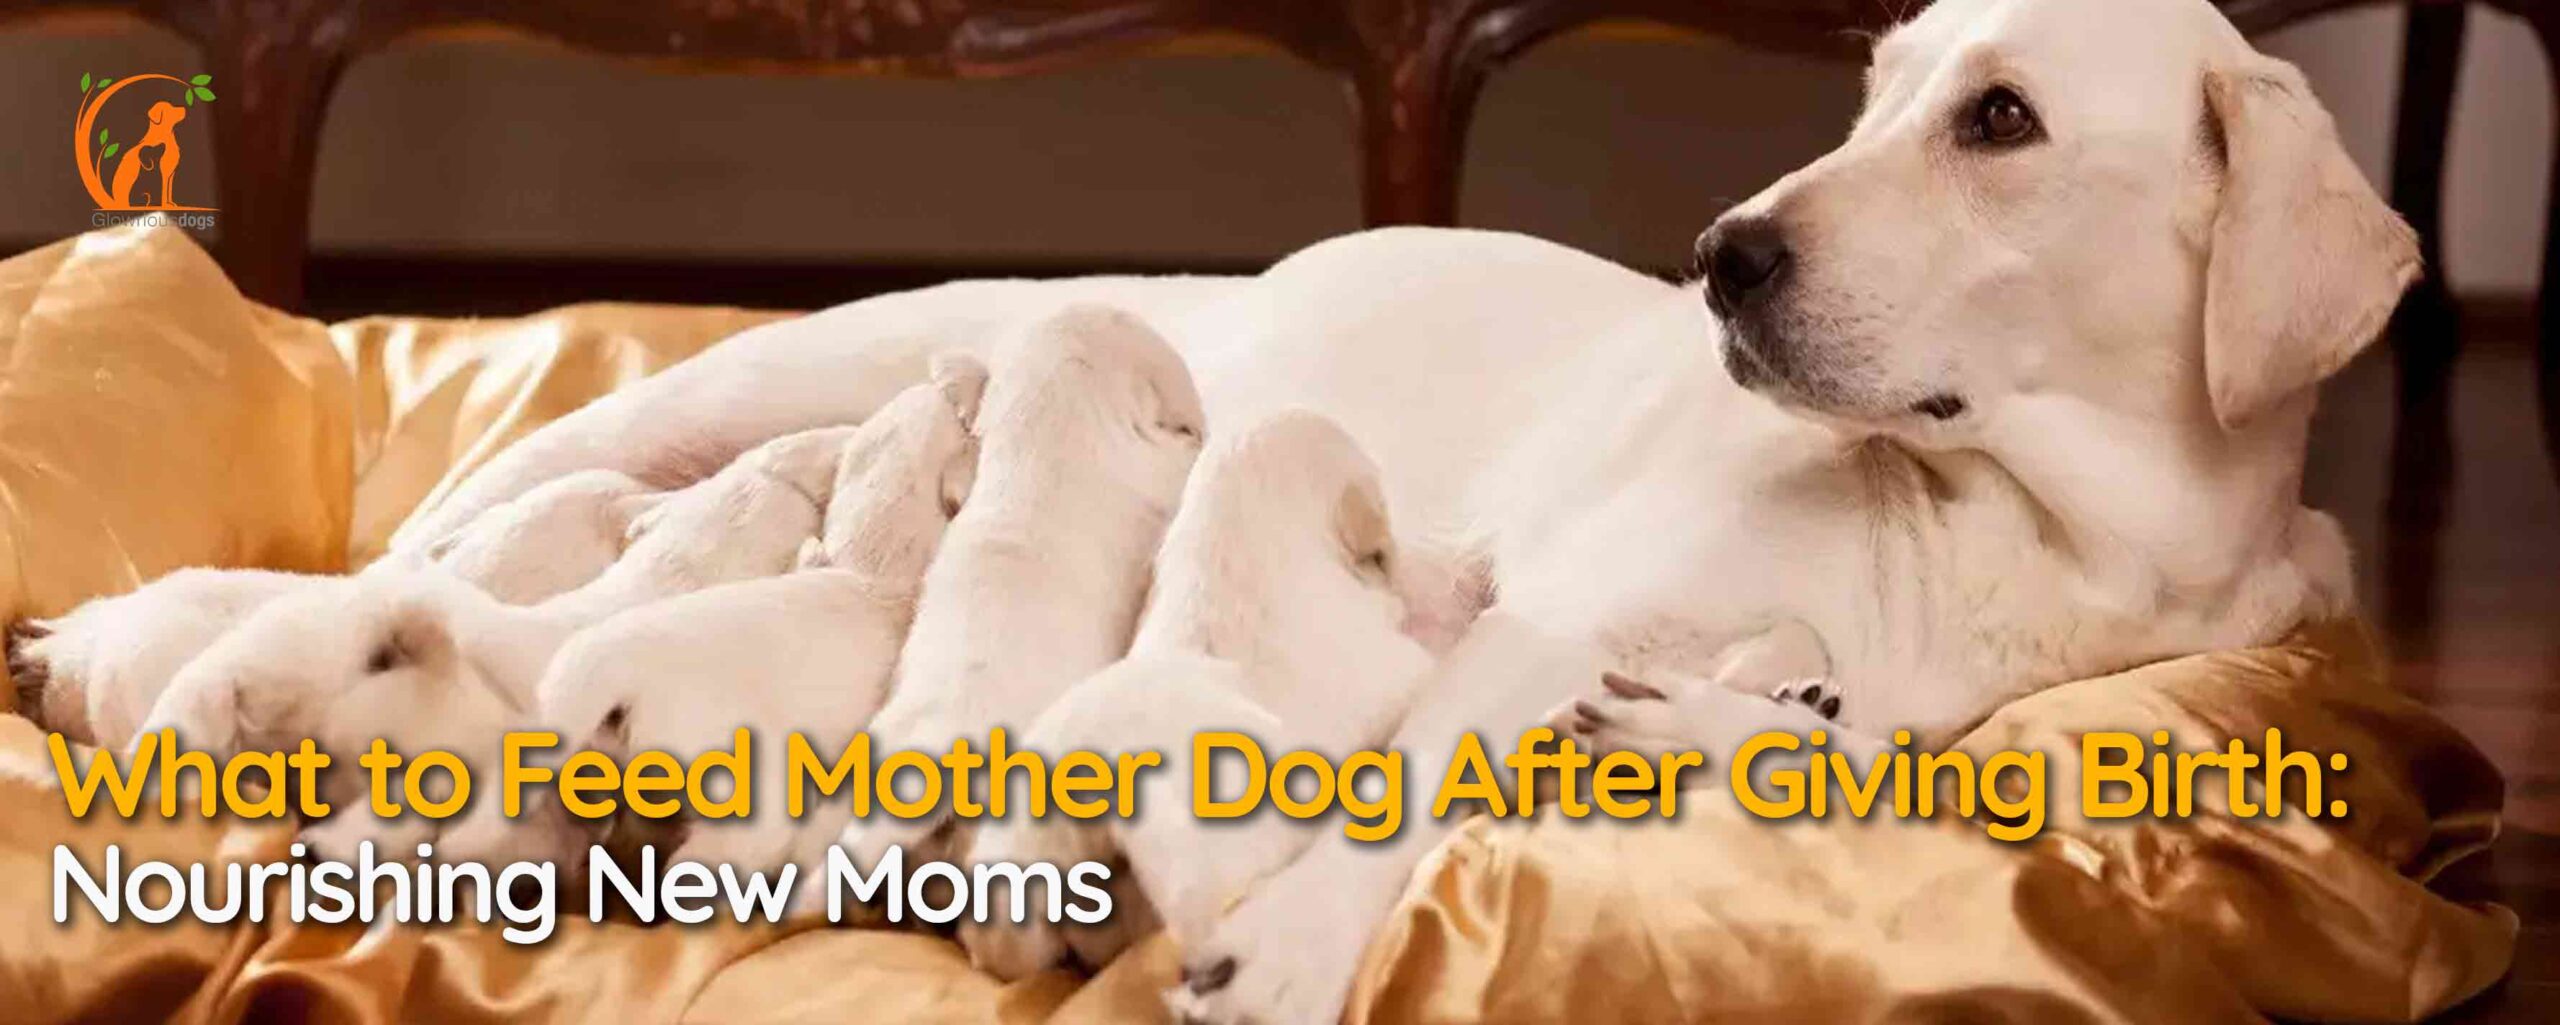 What to Feed Mother Dog After Giving Birth: Nourishing New Moms